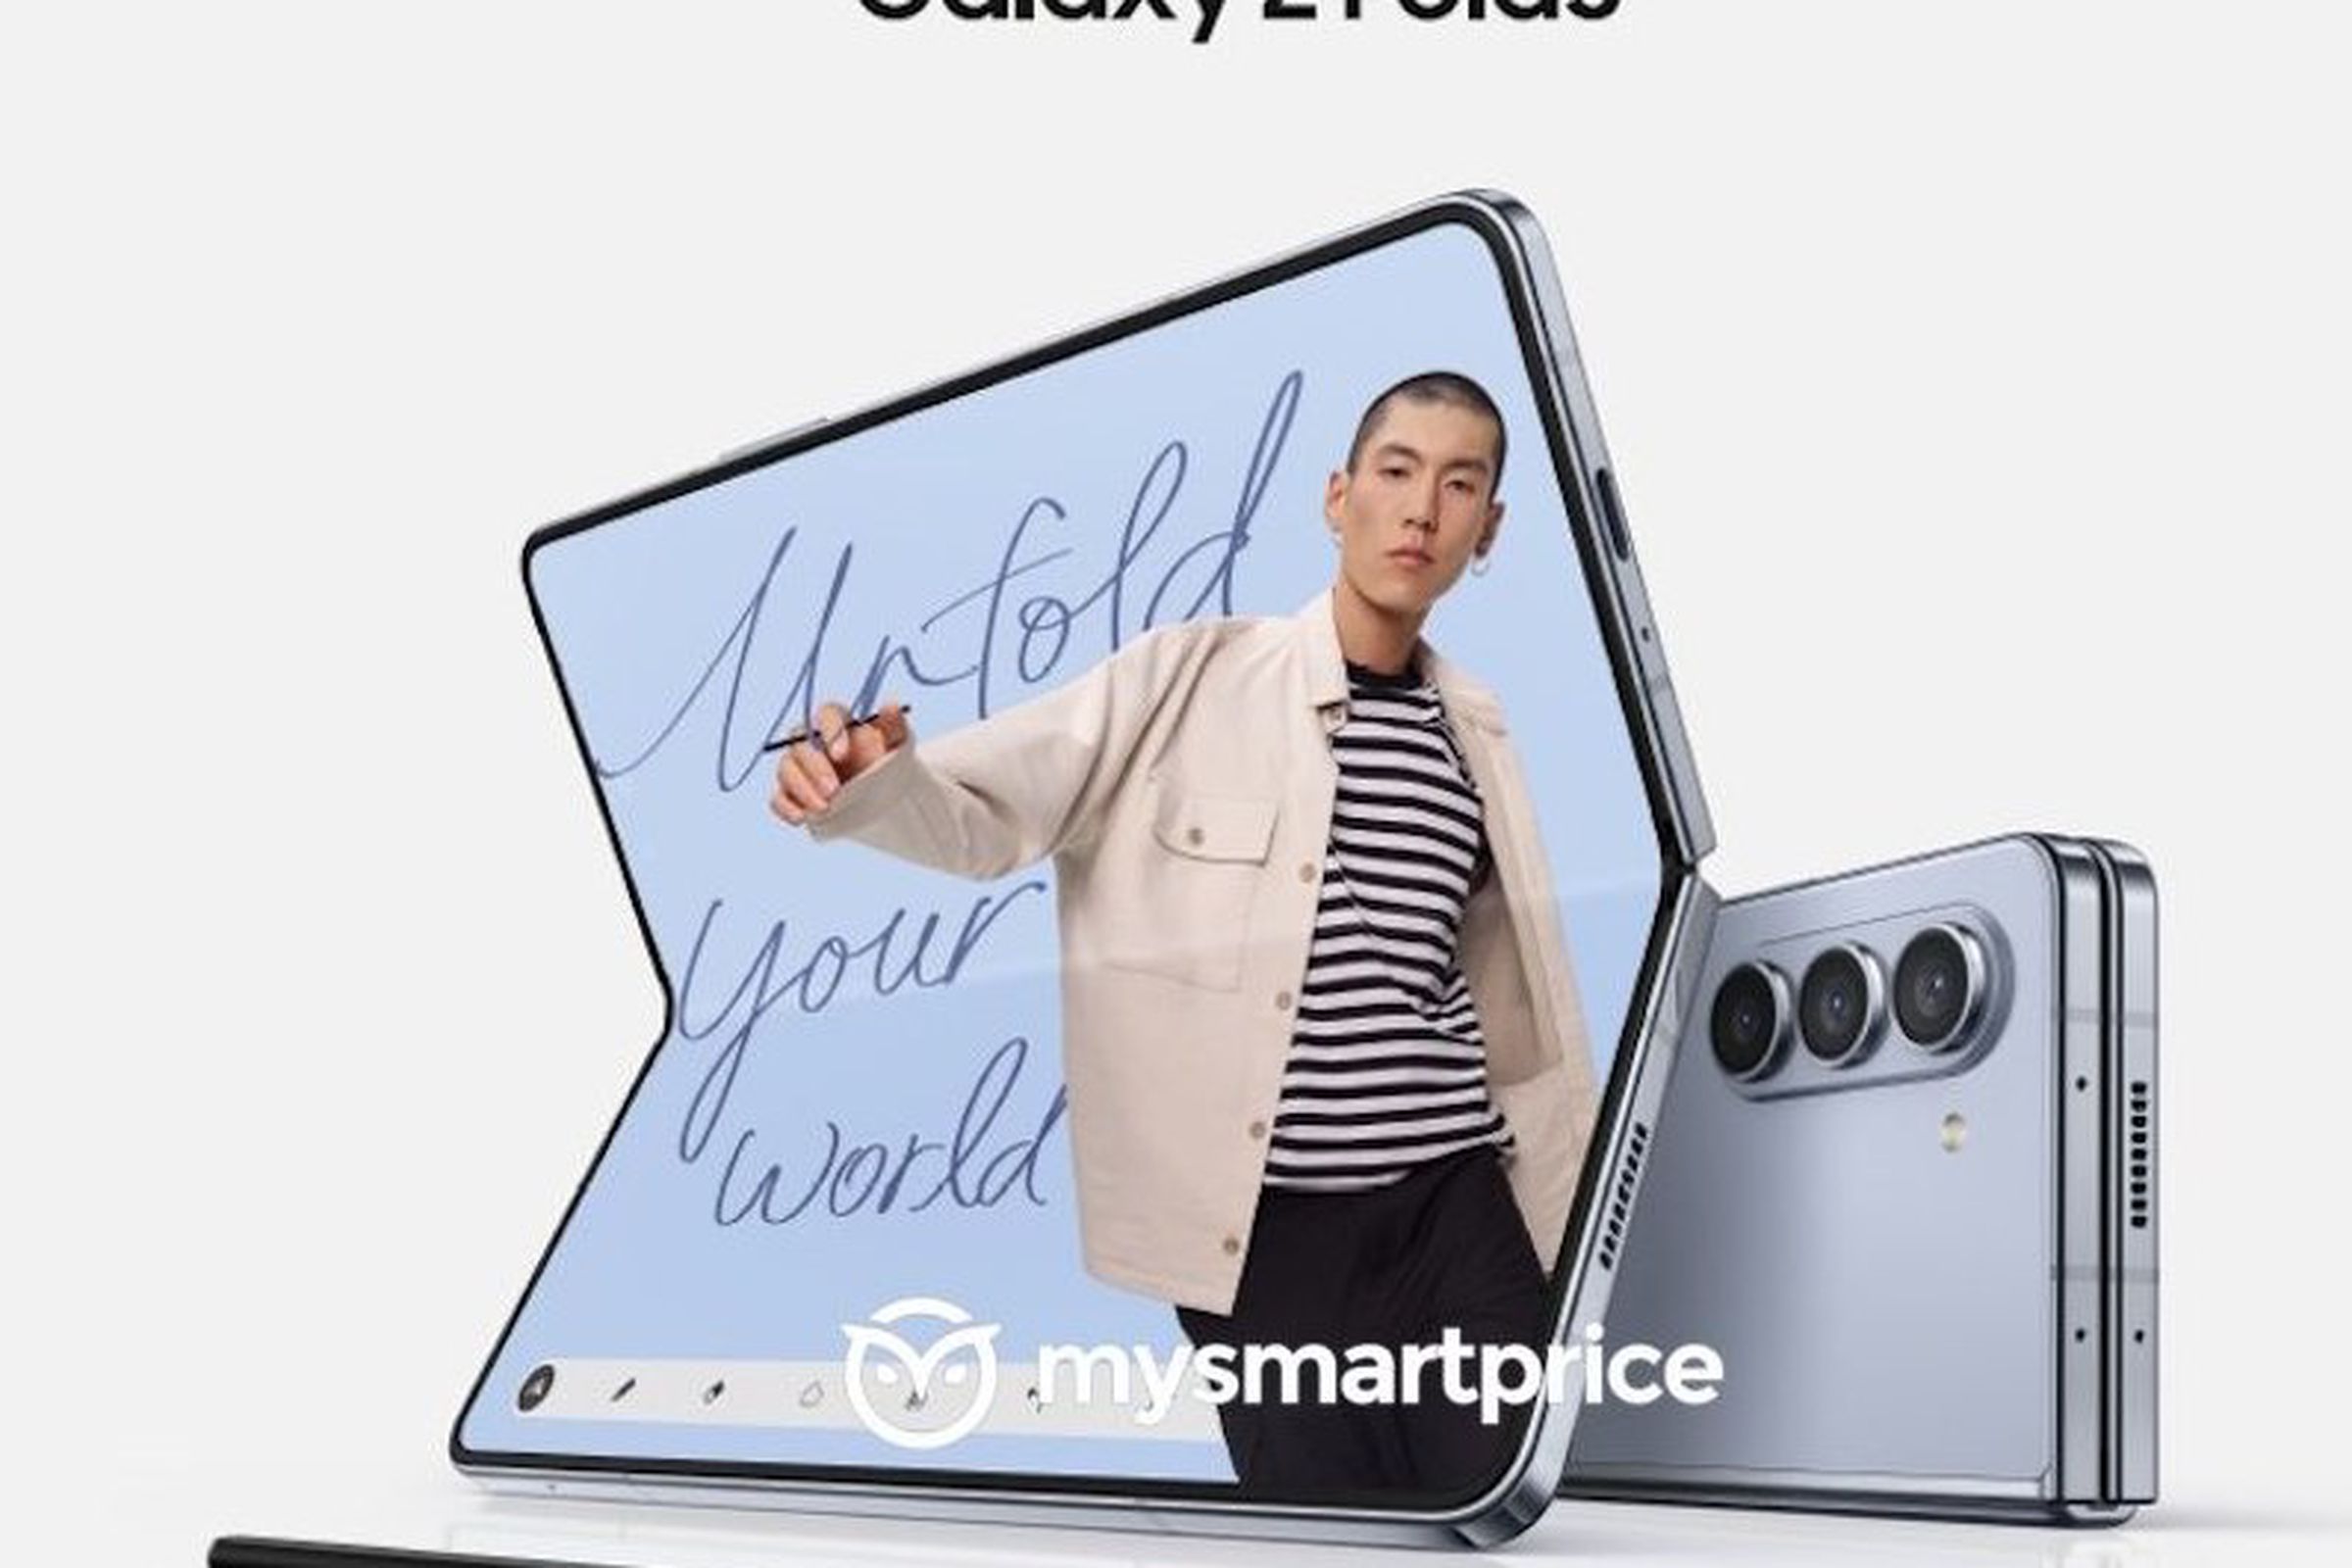 A promotional image showing two phones, one unfolded with its large inner screen exposed showing a model and the words “Unfold your world.”